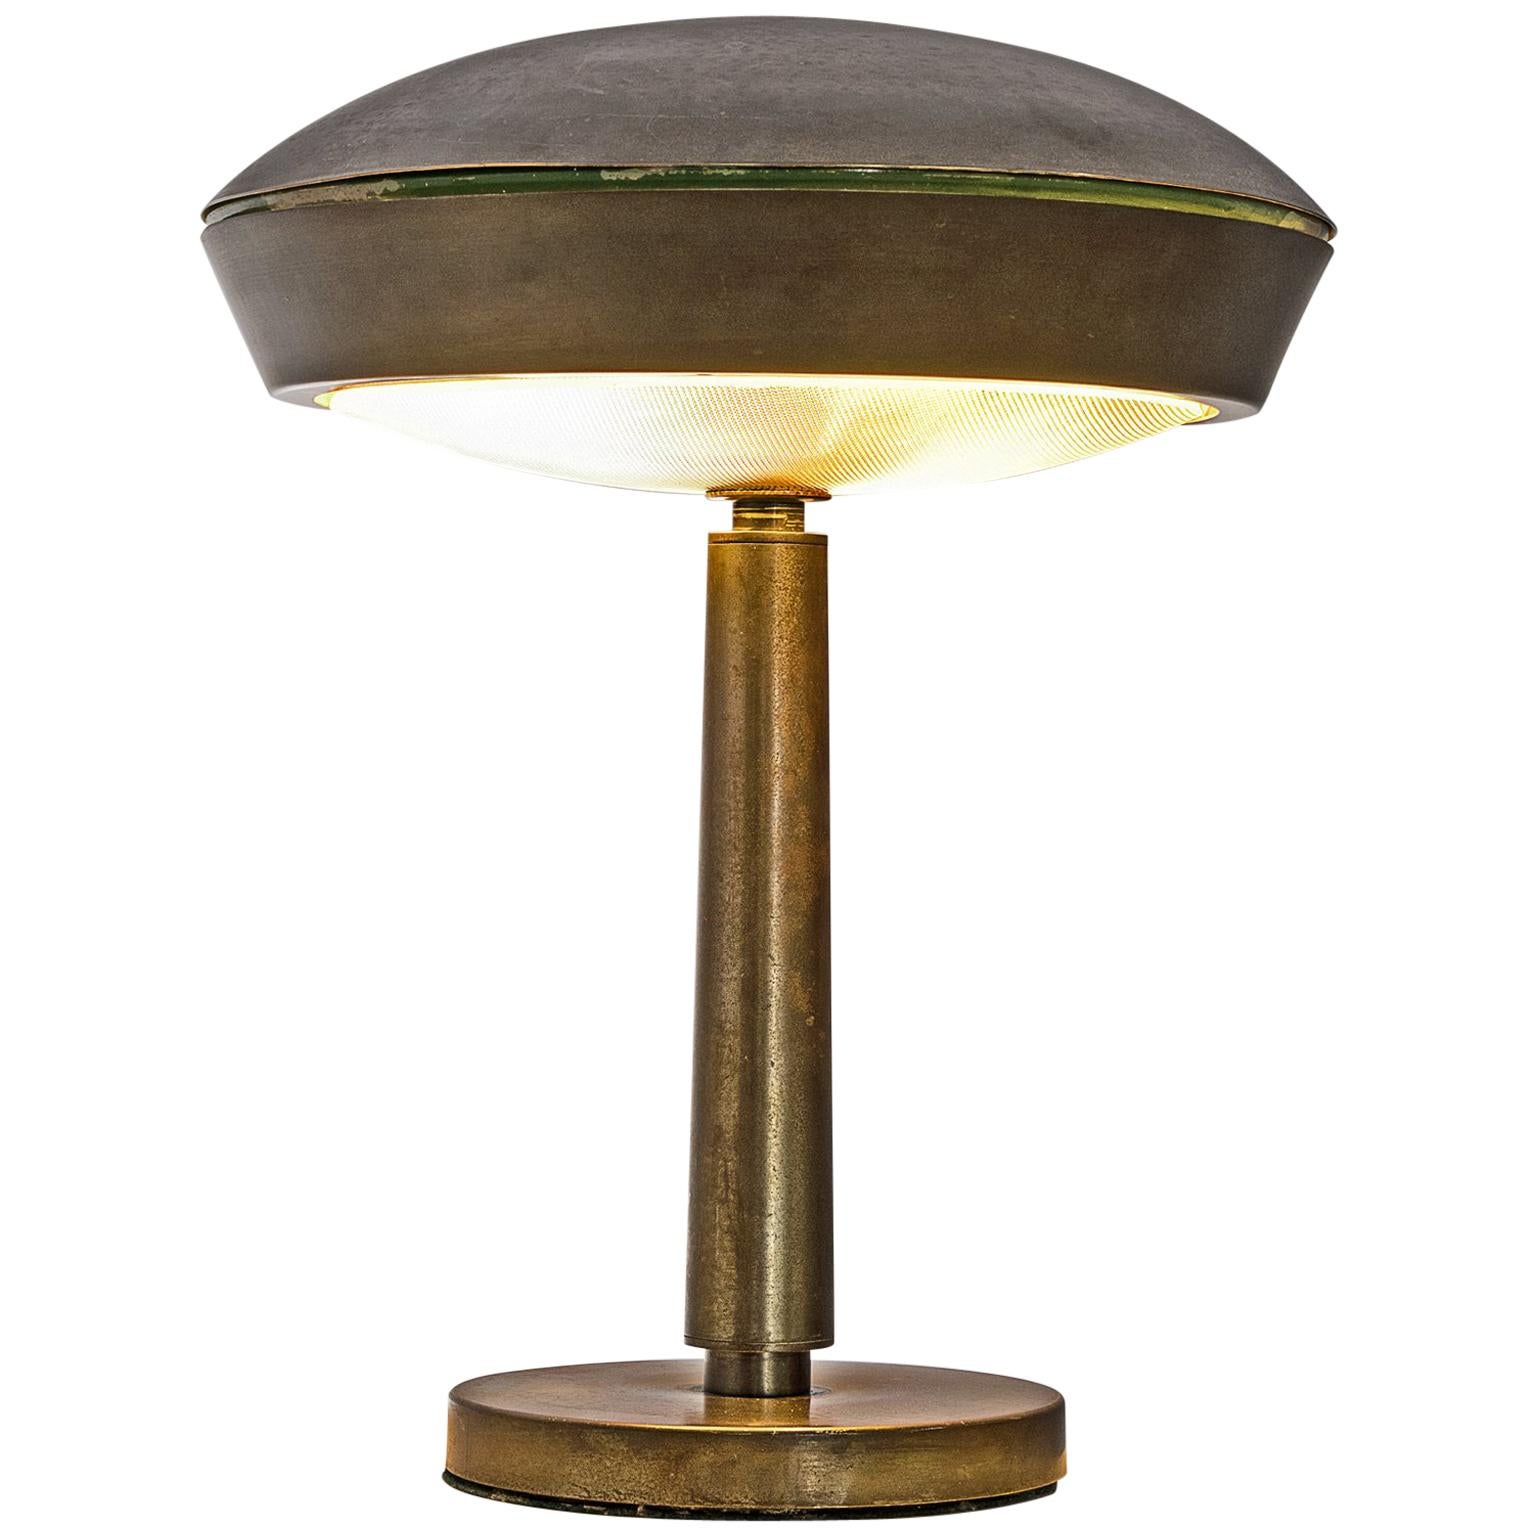 Italian Table Polished Brass Table Lamp